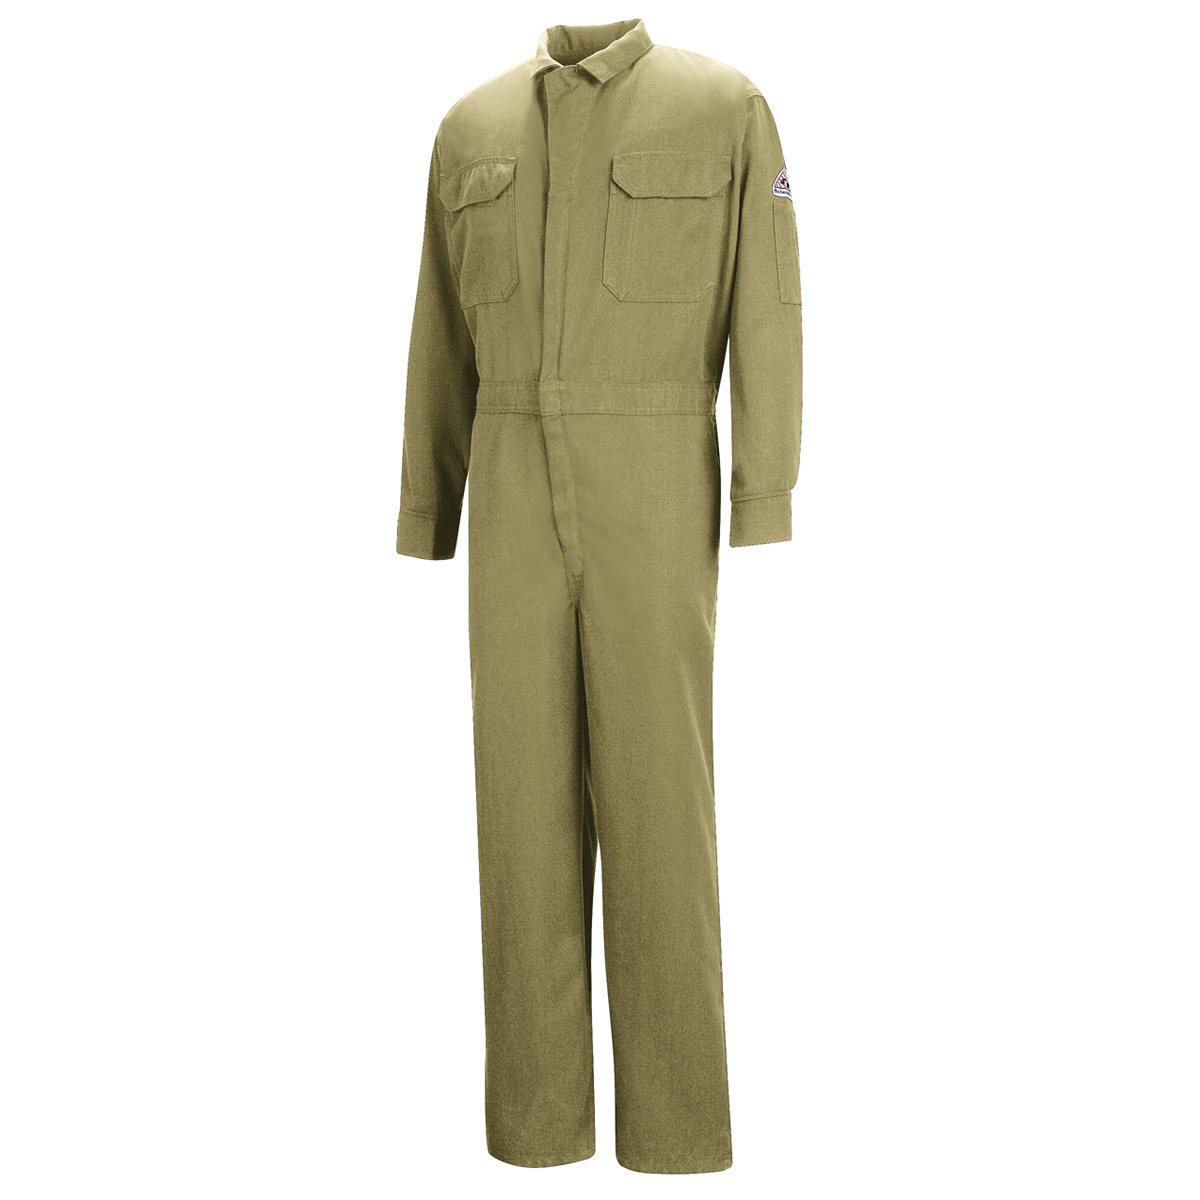 Bulwark® 48 Tall Khaki Modacrylic/Lyocell/Aramid Water Repellent Flame Resistant Coveralls With Zipper Front Closure